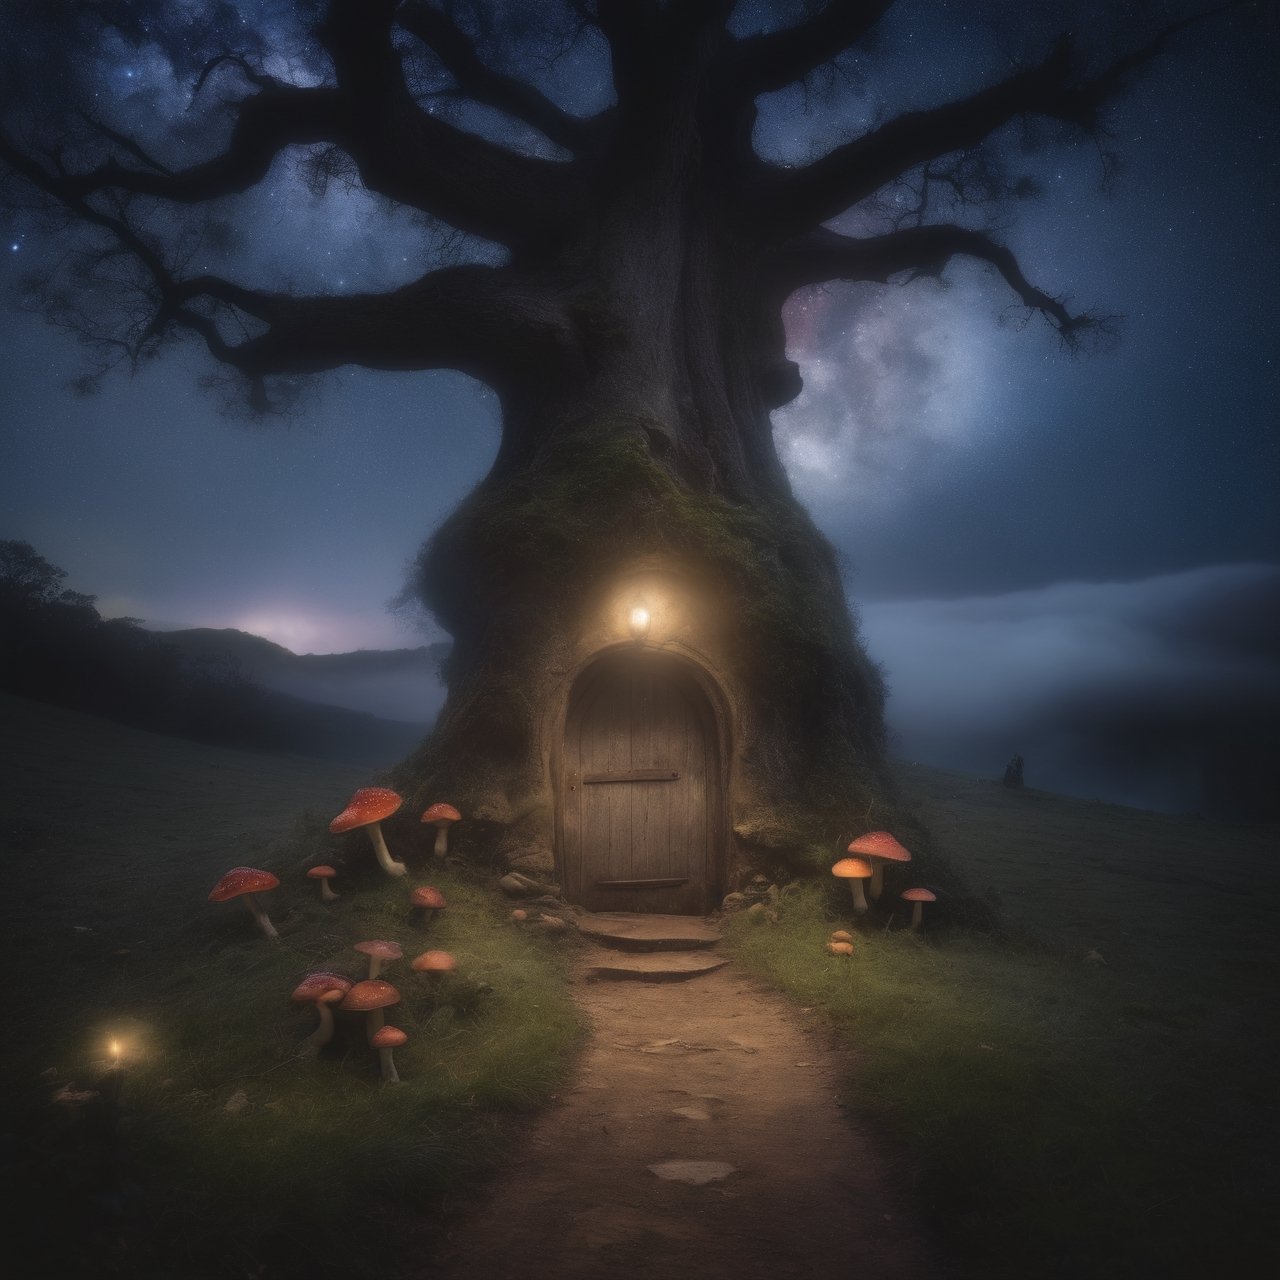 (Hasselblad 35mm, Award Winner, (photorealistic)), nightime, a montainous landscape, eerie mist, faery tales, mystical tree of life in center, luminescent faerie mushroom ring, nebula, starry sky, harmonious, sublime, serenity, luminescent fireflies swirling around tree, rustic path leading to a magical glowing door inside tree, 